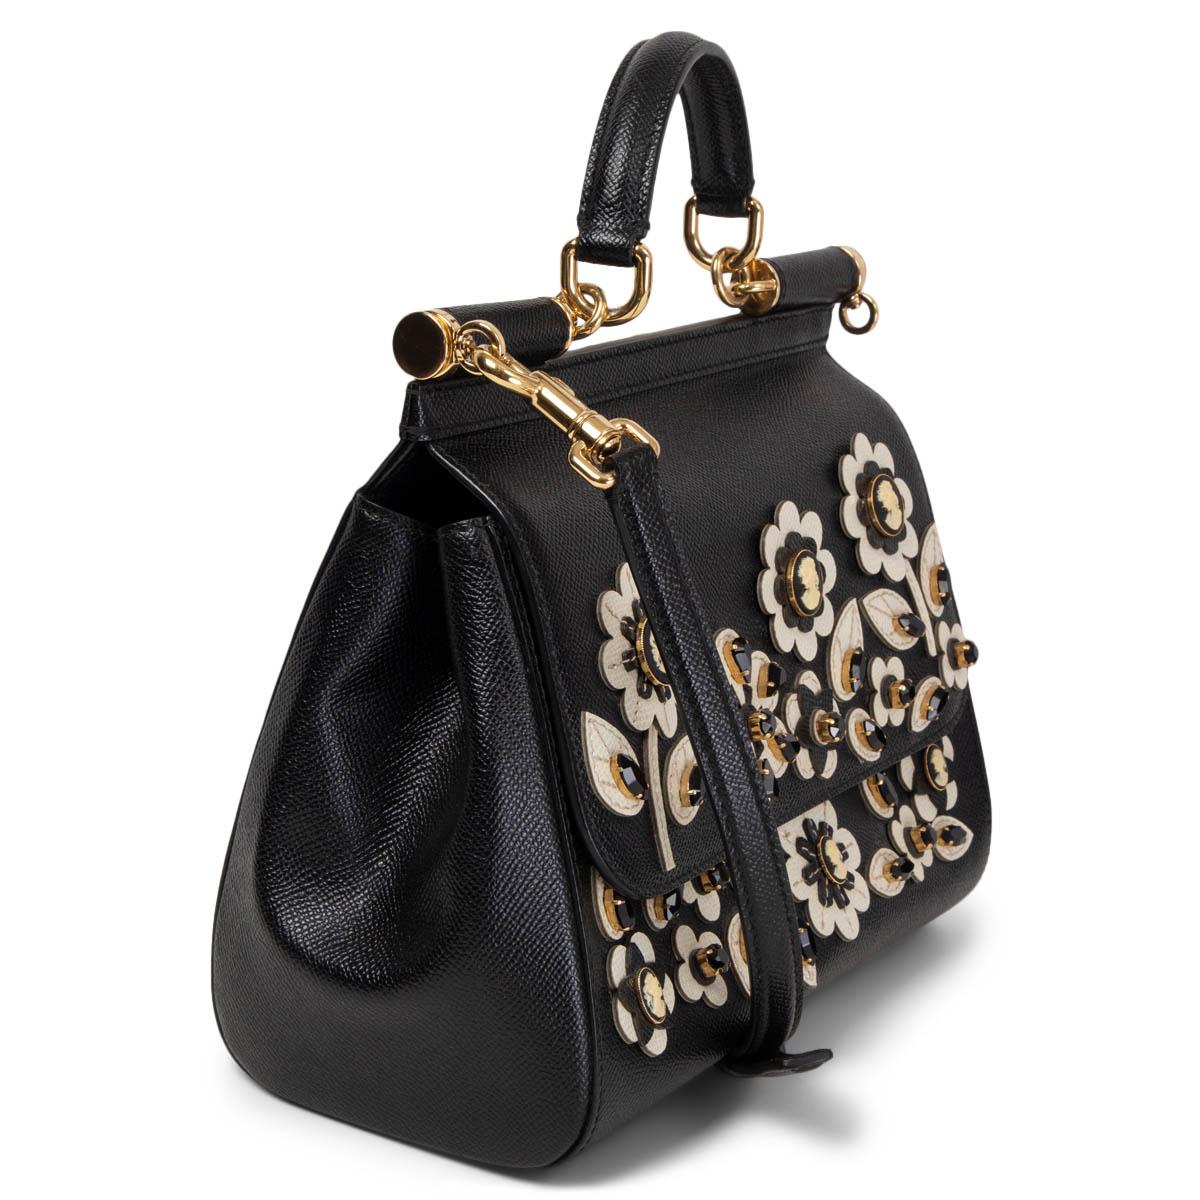 100% authentic Dolce & Gabbana Sicily Medium bag embellished with off-white flowers and crystals featuring light gold-tone hardware. The design has a structured shape and is crafted from grained black leather. The bag features a top handle and a